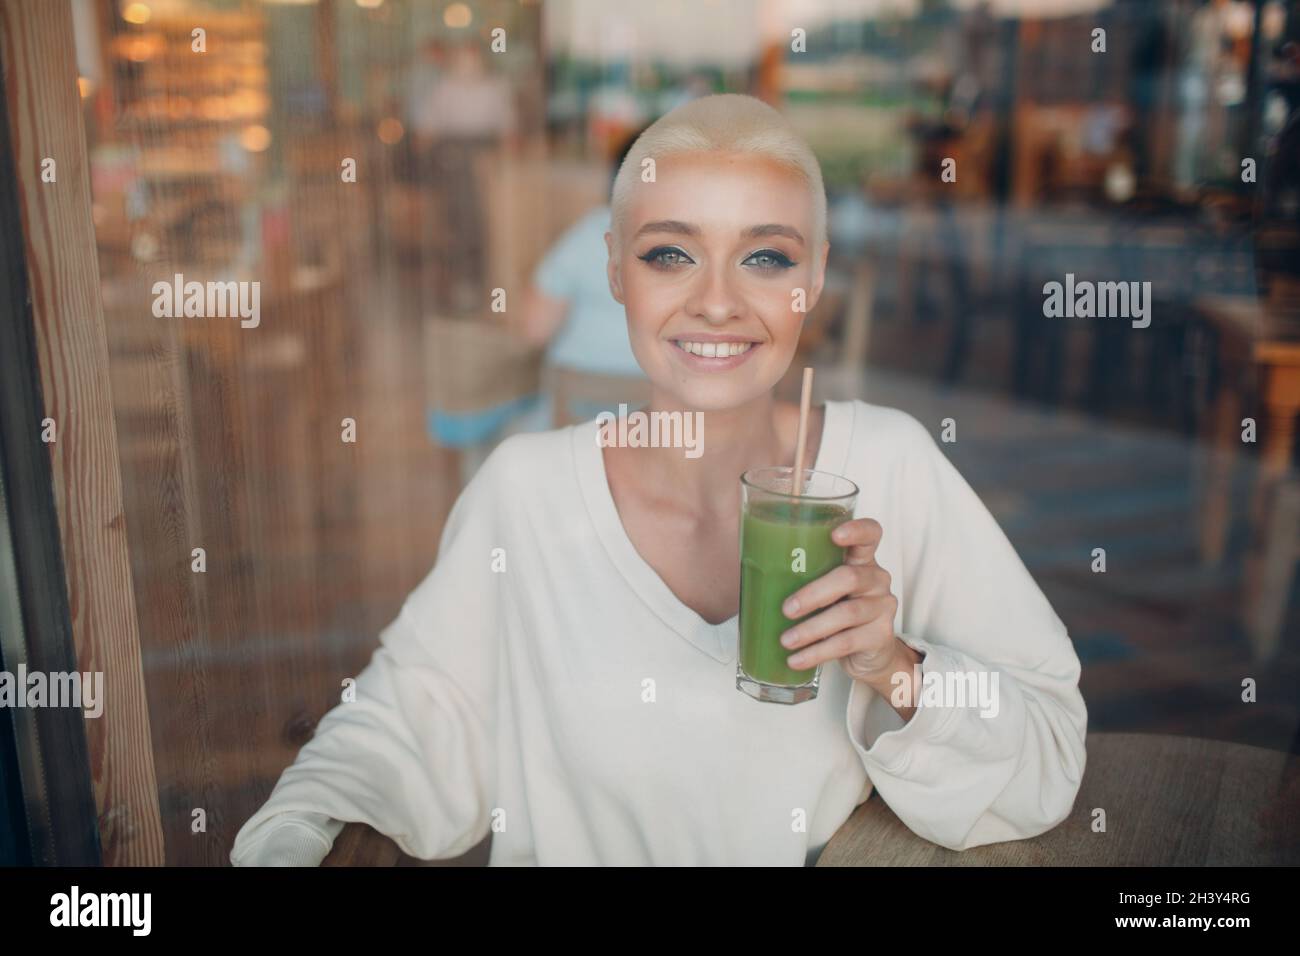 Millenial young woman blonde short hair indoor with green smoothie Stock Photo